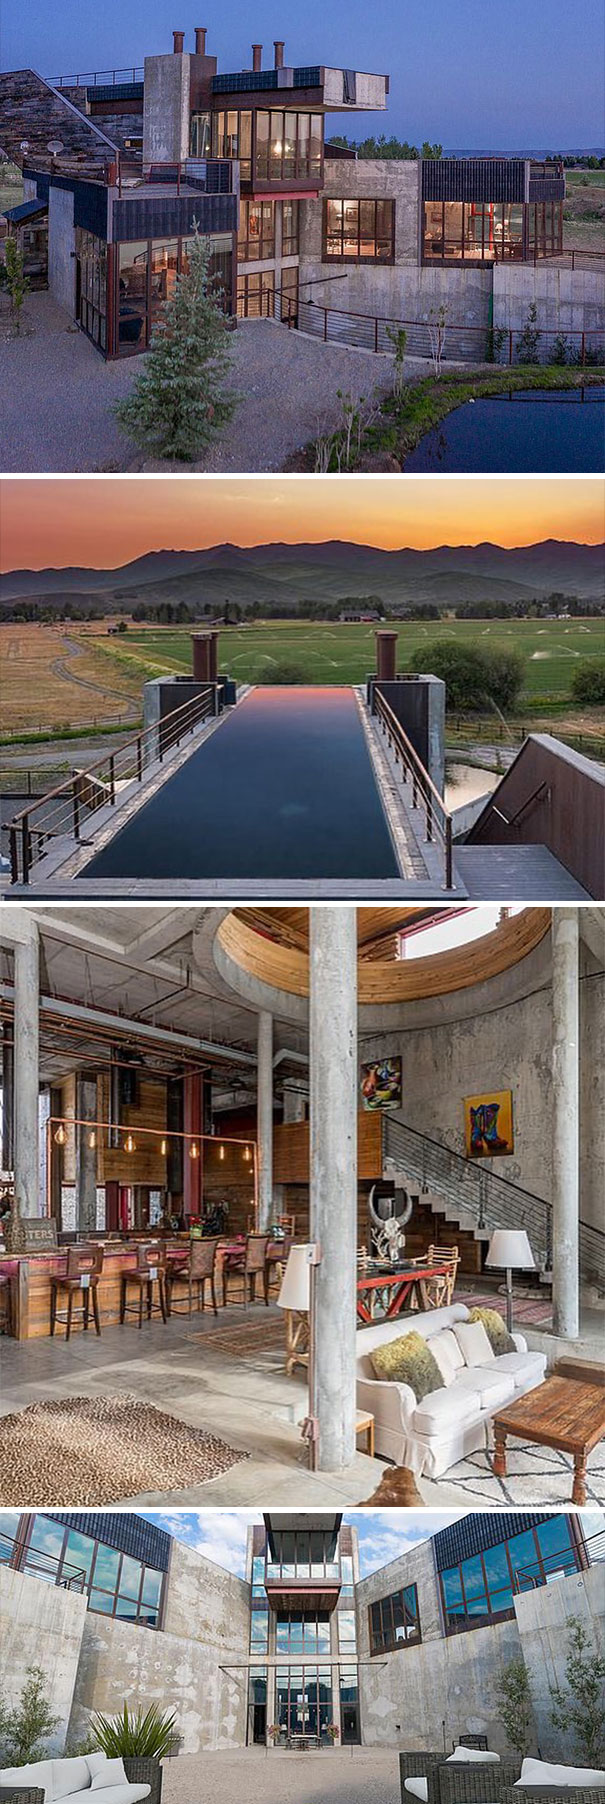 This Home Is Called “The Sun Valley Starship” And I Am Pretty Sure Its Zombie Proof. $5,950,000